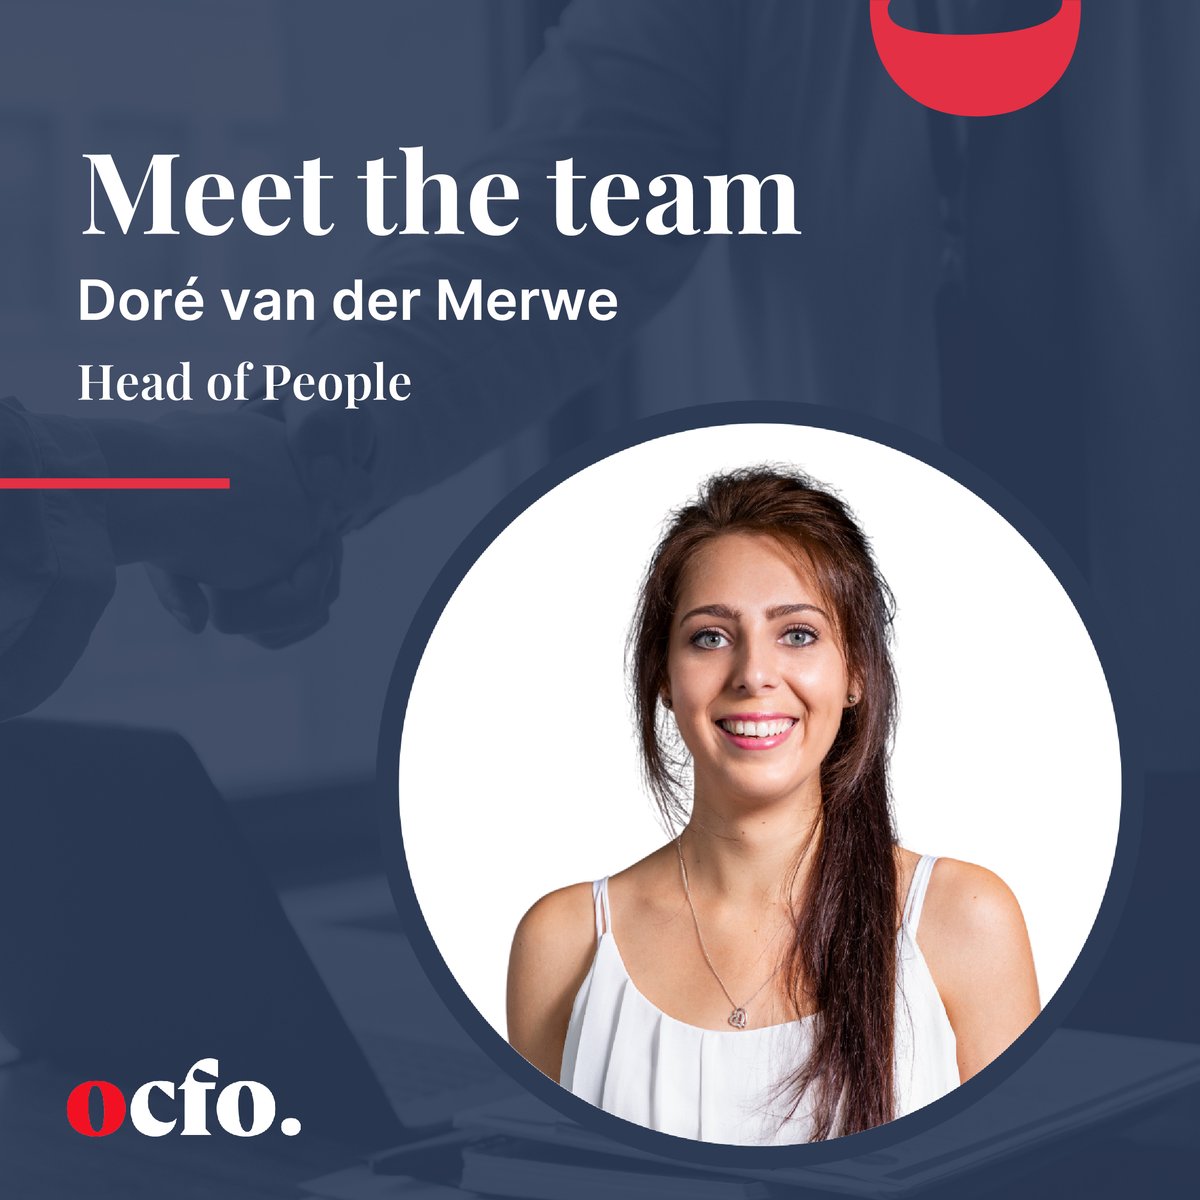 Doré van der Merwe, Head of People, manages the People Department, overseeing strategic projects & exploring possible channels of growth. Her warmth, energy & people skills enriches our team dynamic. Our Team:ocfo.com/about/

#ocfo #cfo #CloudAccounting #automate #finance